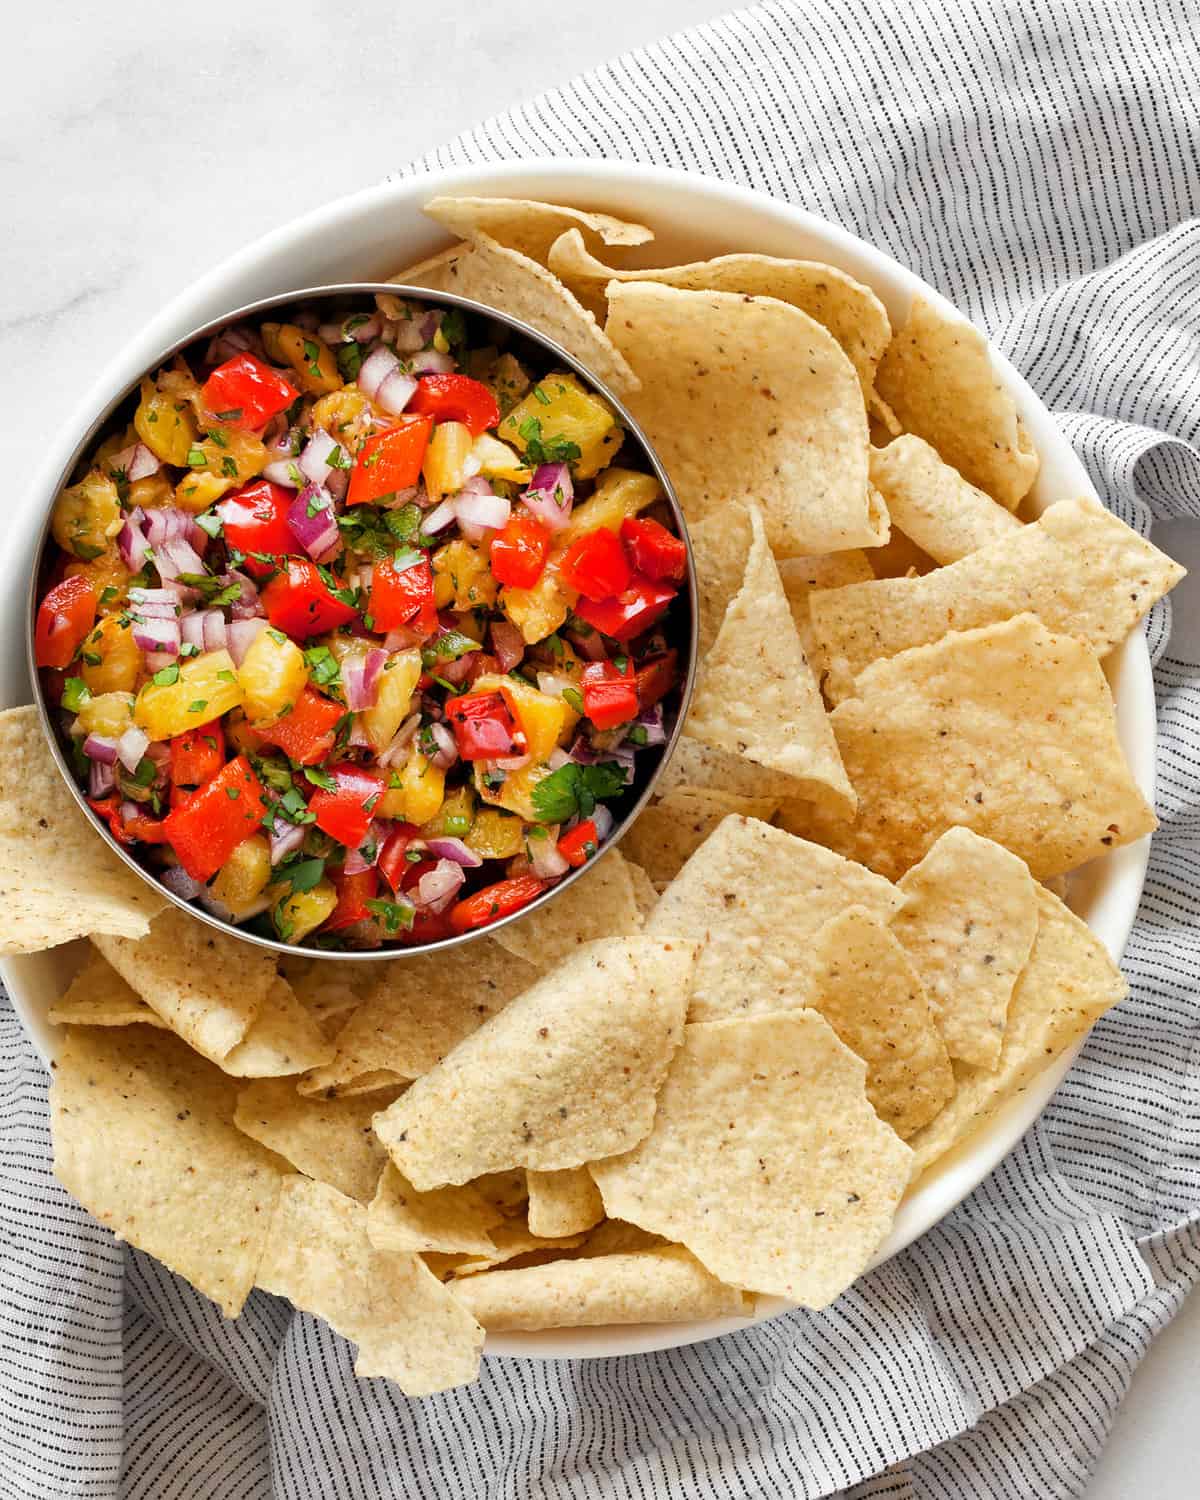 Salsa in a bowl with tortilla chips.